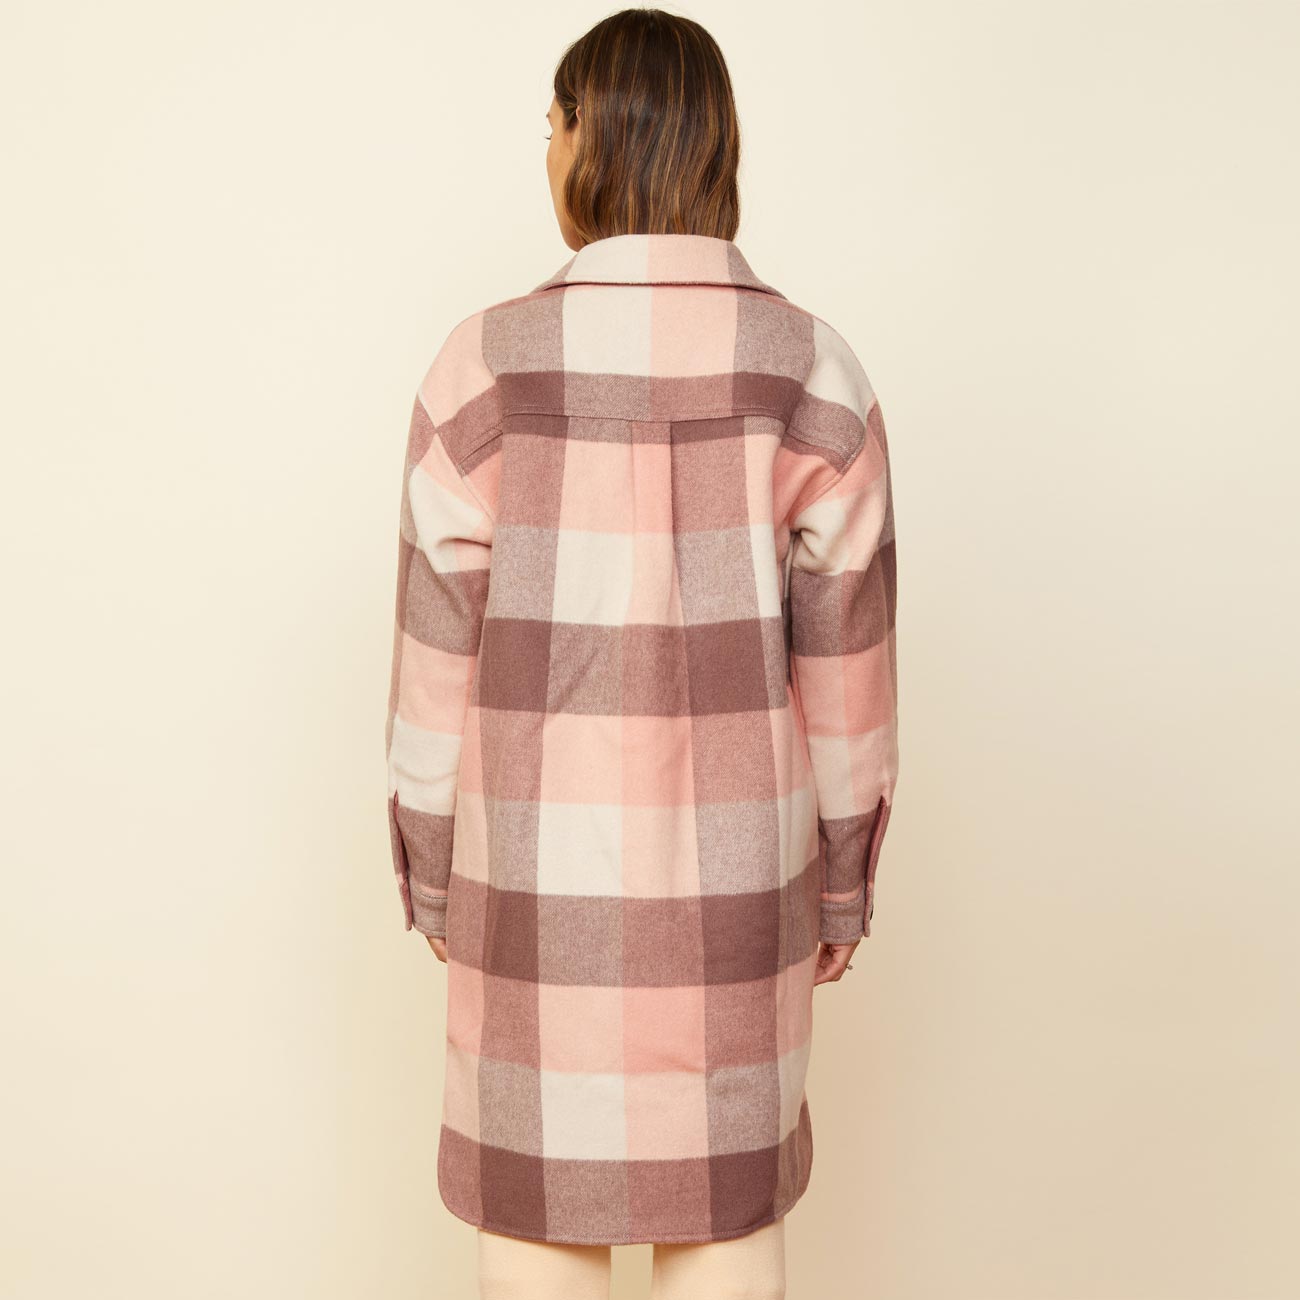 Back view of model wearing the long woolen shirt jacket in pink.